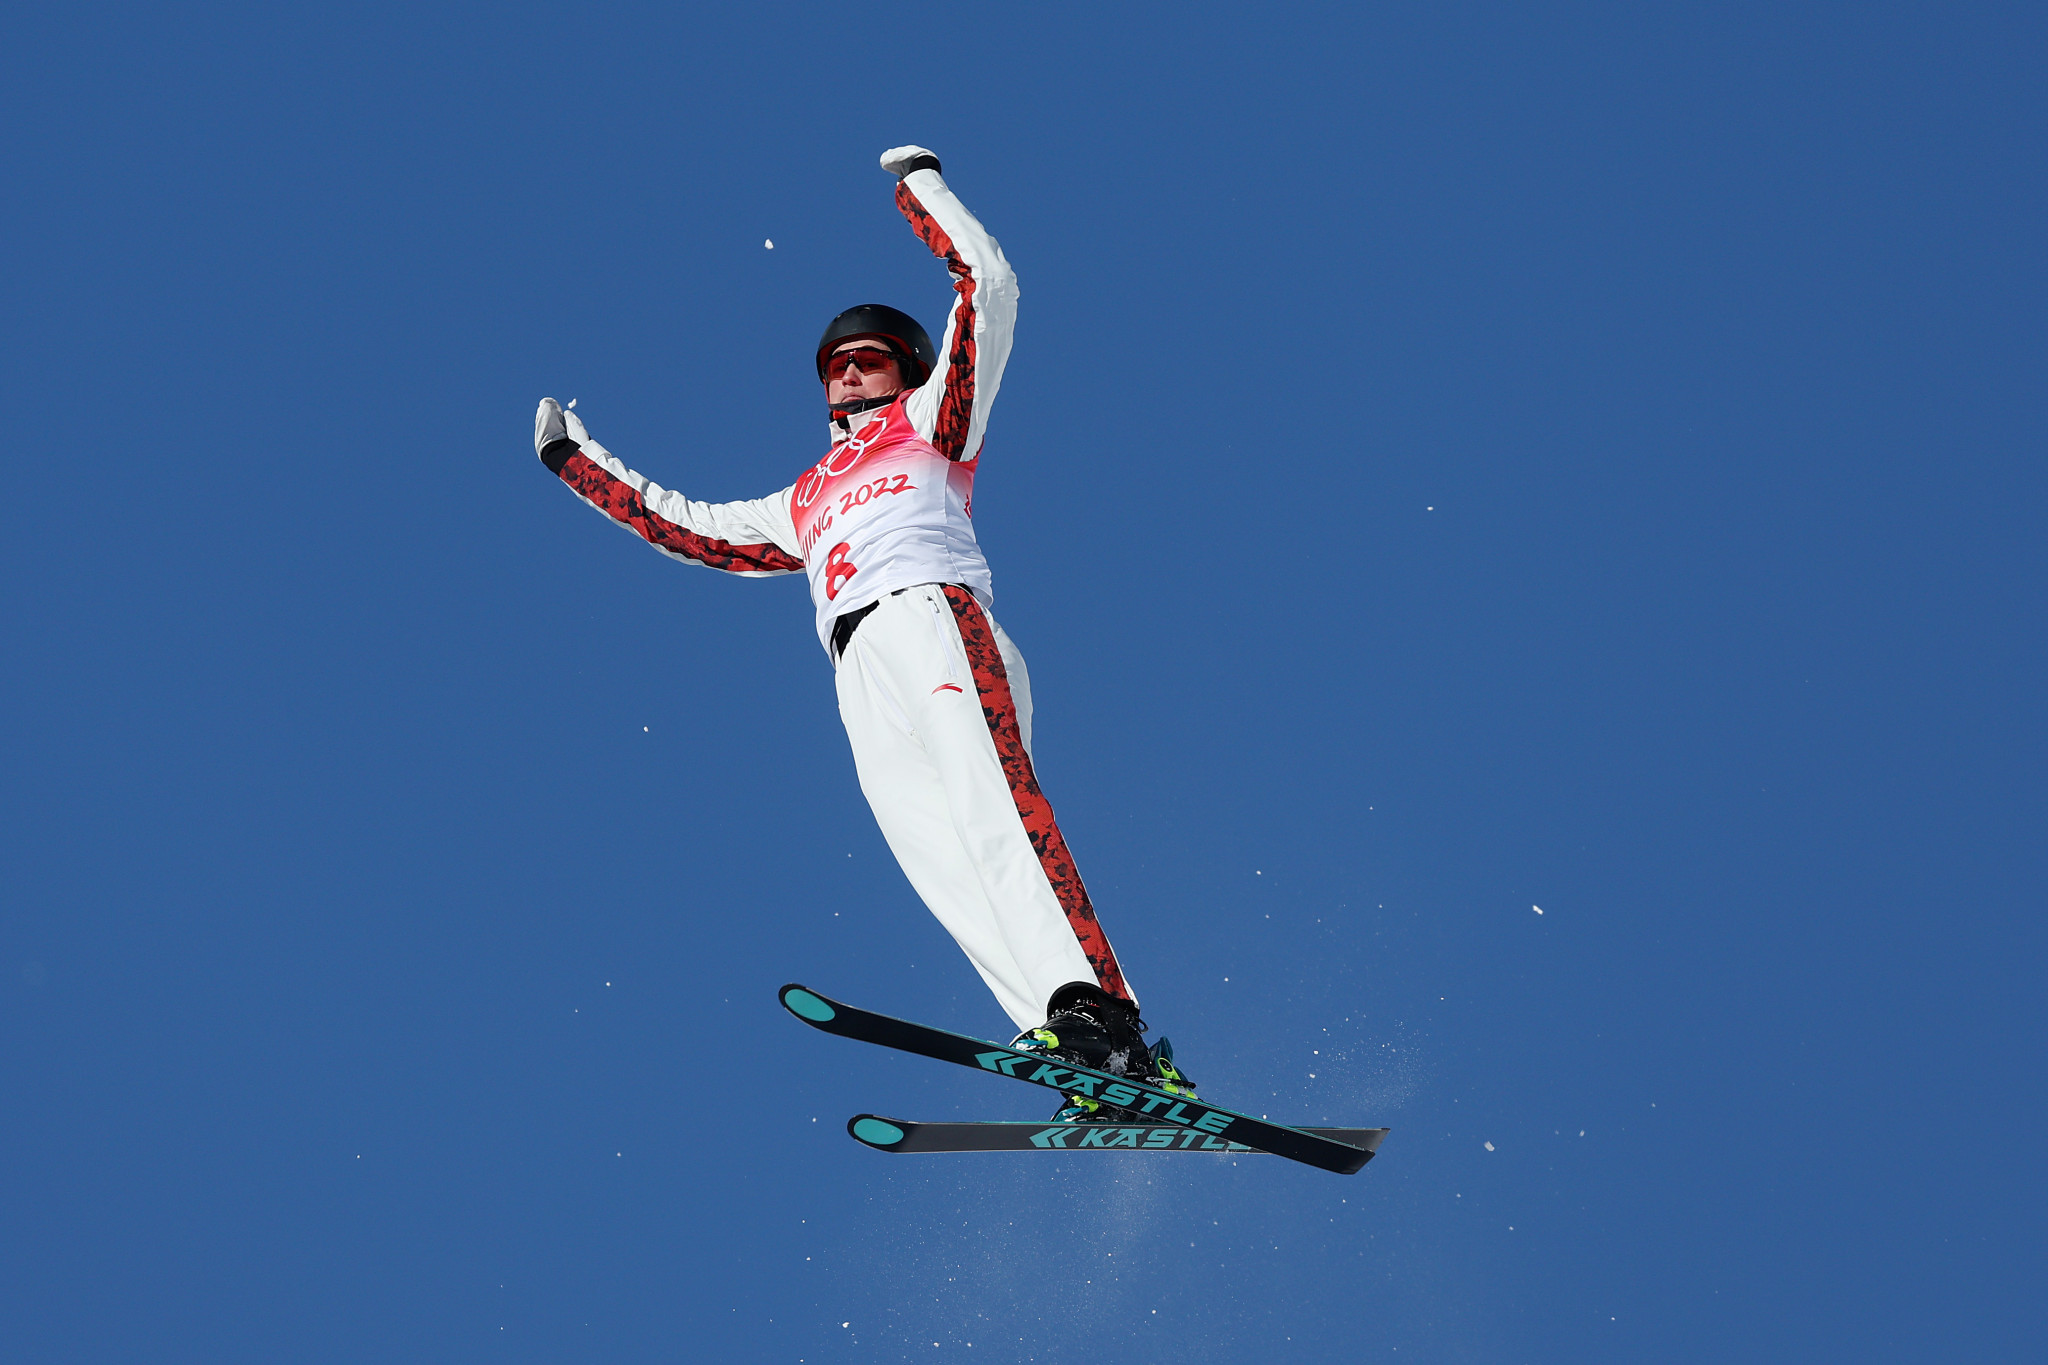 Thenault enjoys home success at Aerials World Cup in Le Relais